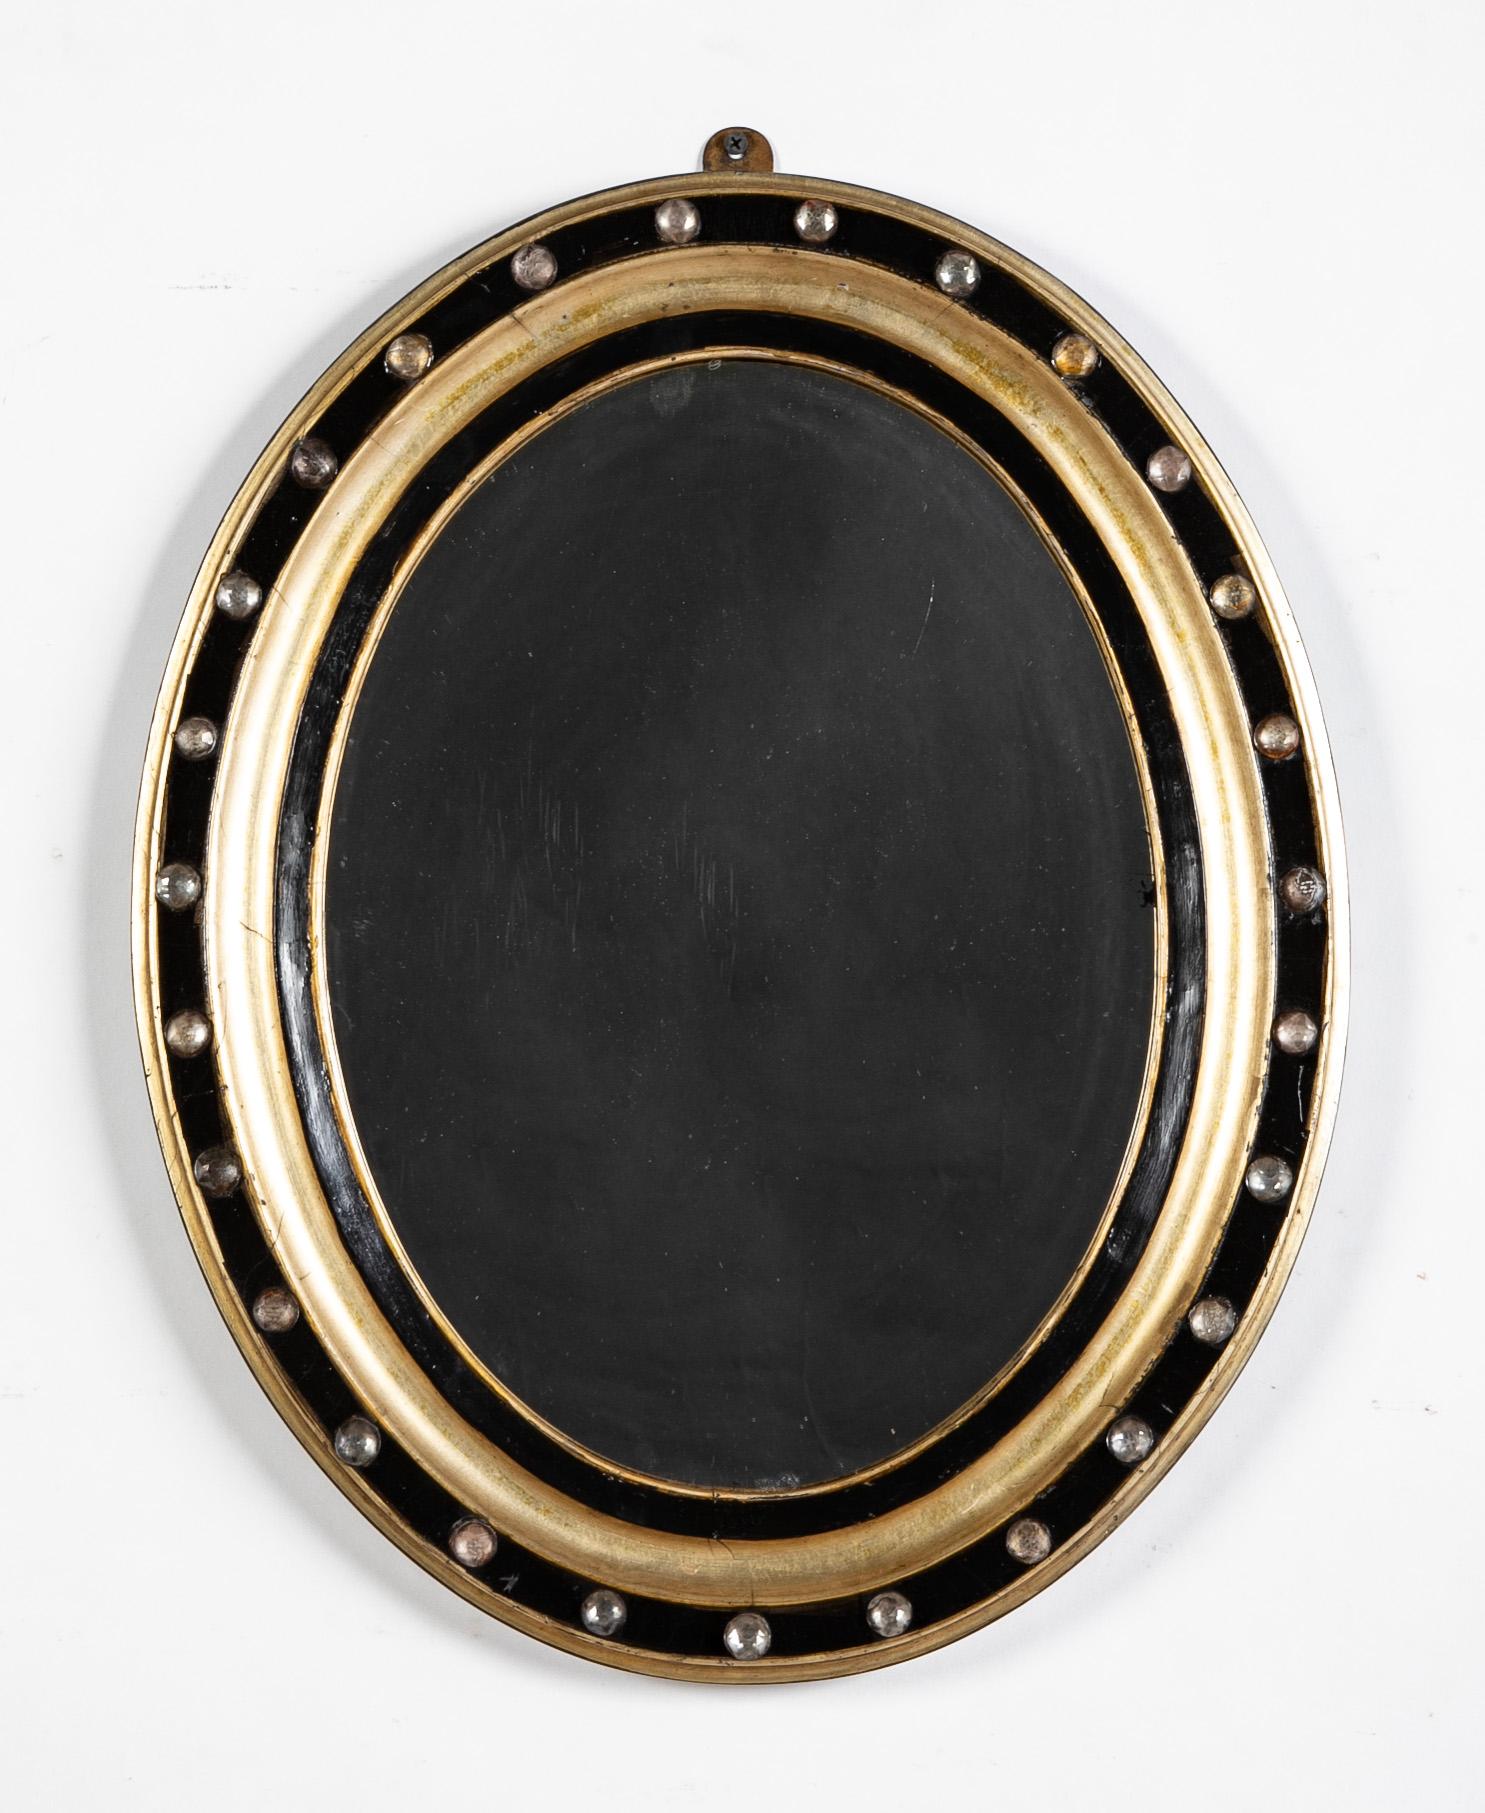 A handsome pair or parcel-gilt  and ebonized oval mirrors, The molded frame with bands of faceted and cabochon glass beads. Irish, Circa 1860. 

20 1/2 inches high by 16 3/8 wide by 1 3/4 deep

Provenance: Ex: Phillip Colleck Ltd. , old label on